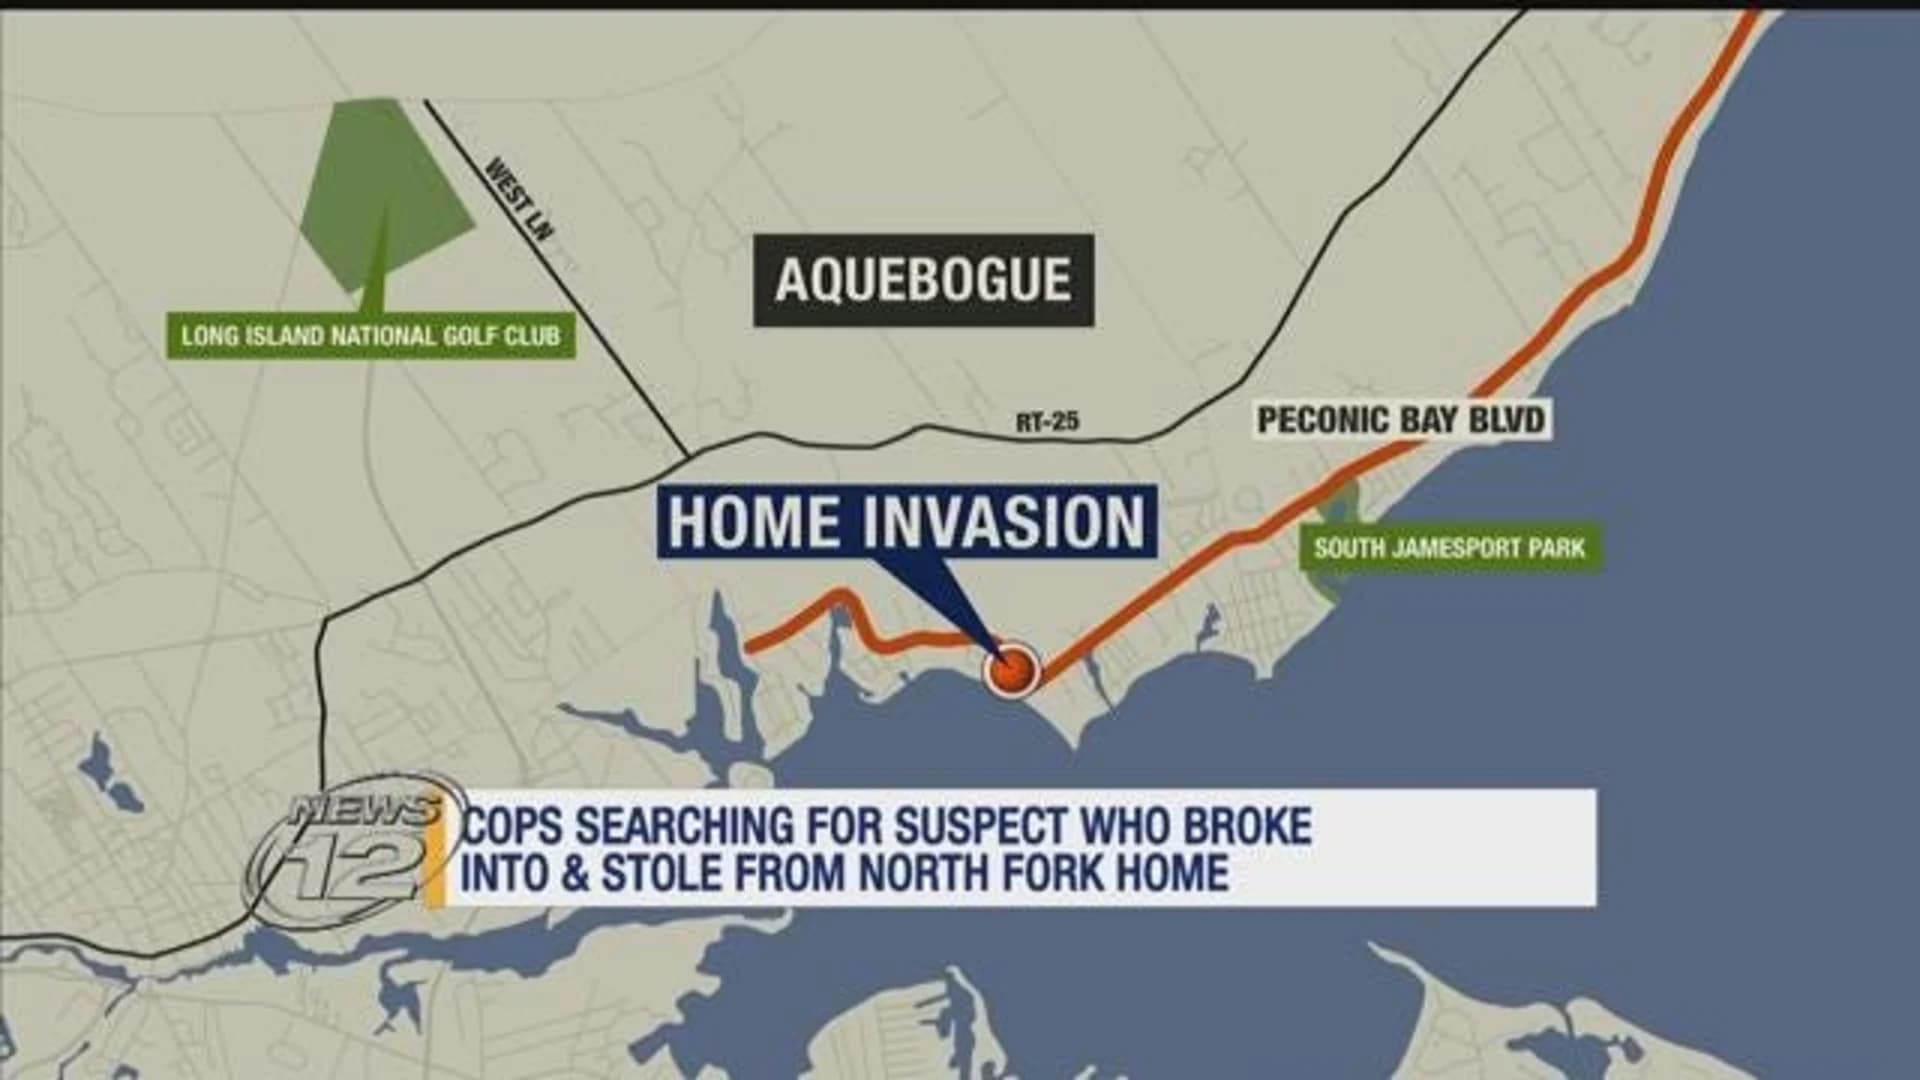 Police search for suspect after home invasion